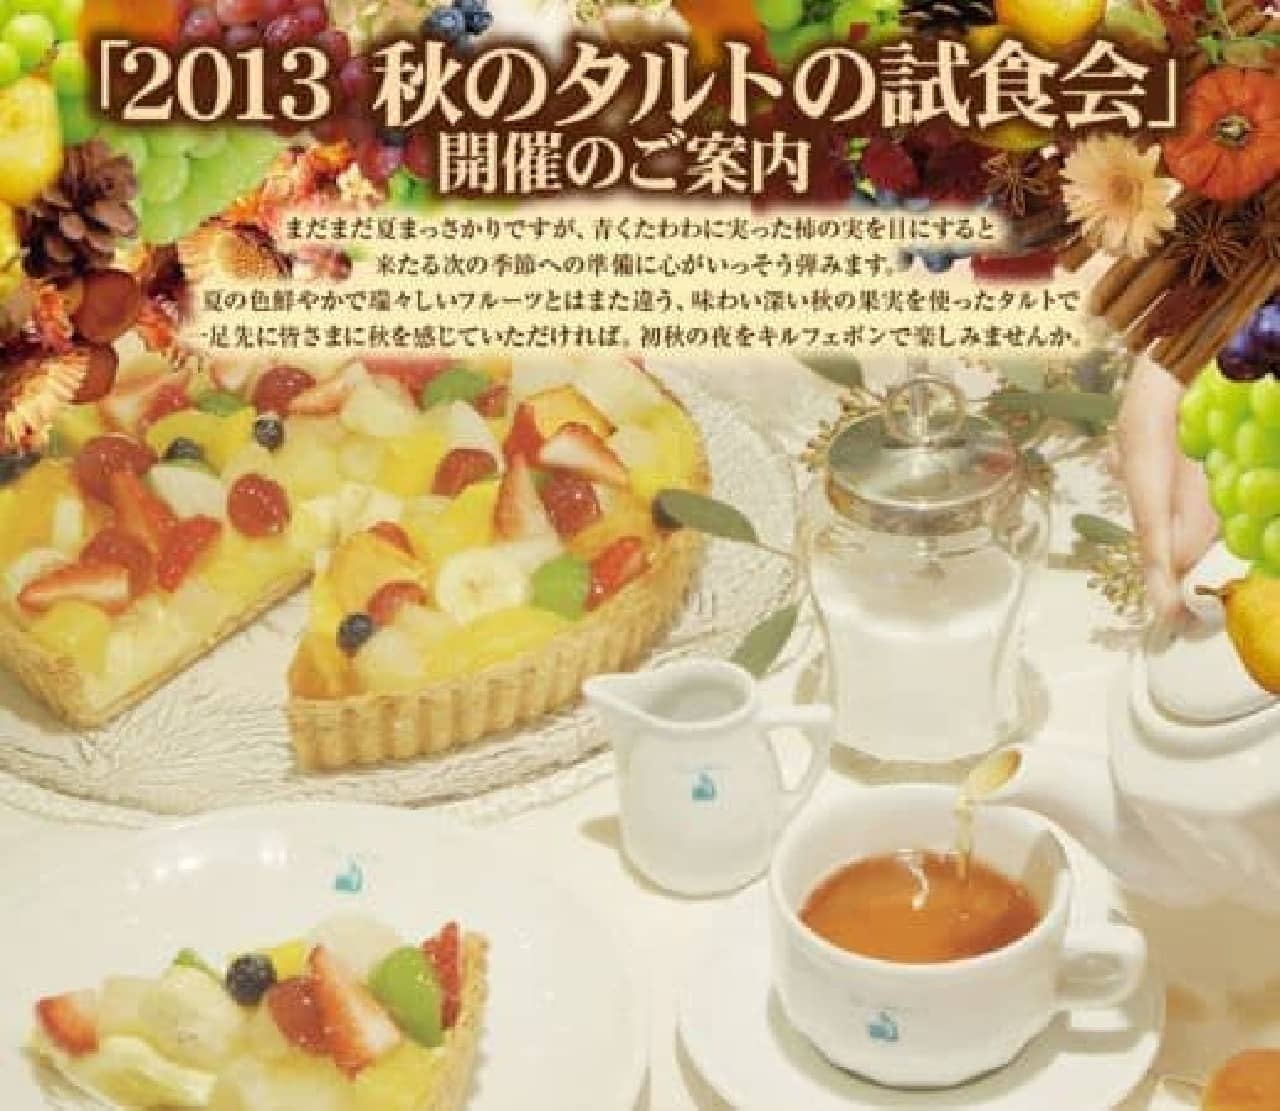 The new autumn tart is currently being prototyped! [Source: Kirfebon Official Website]